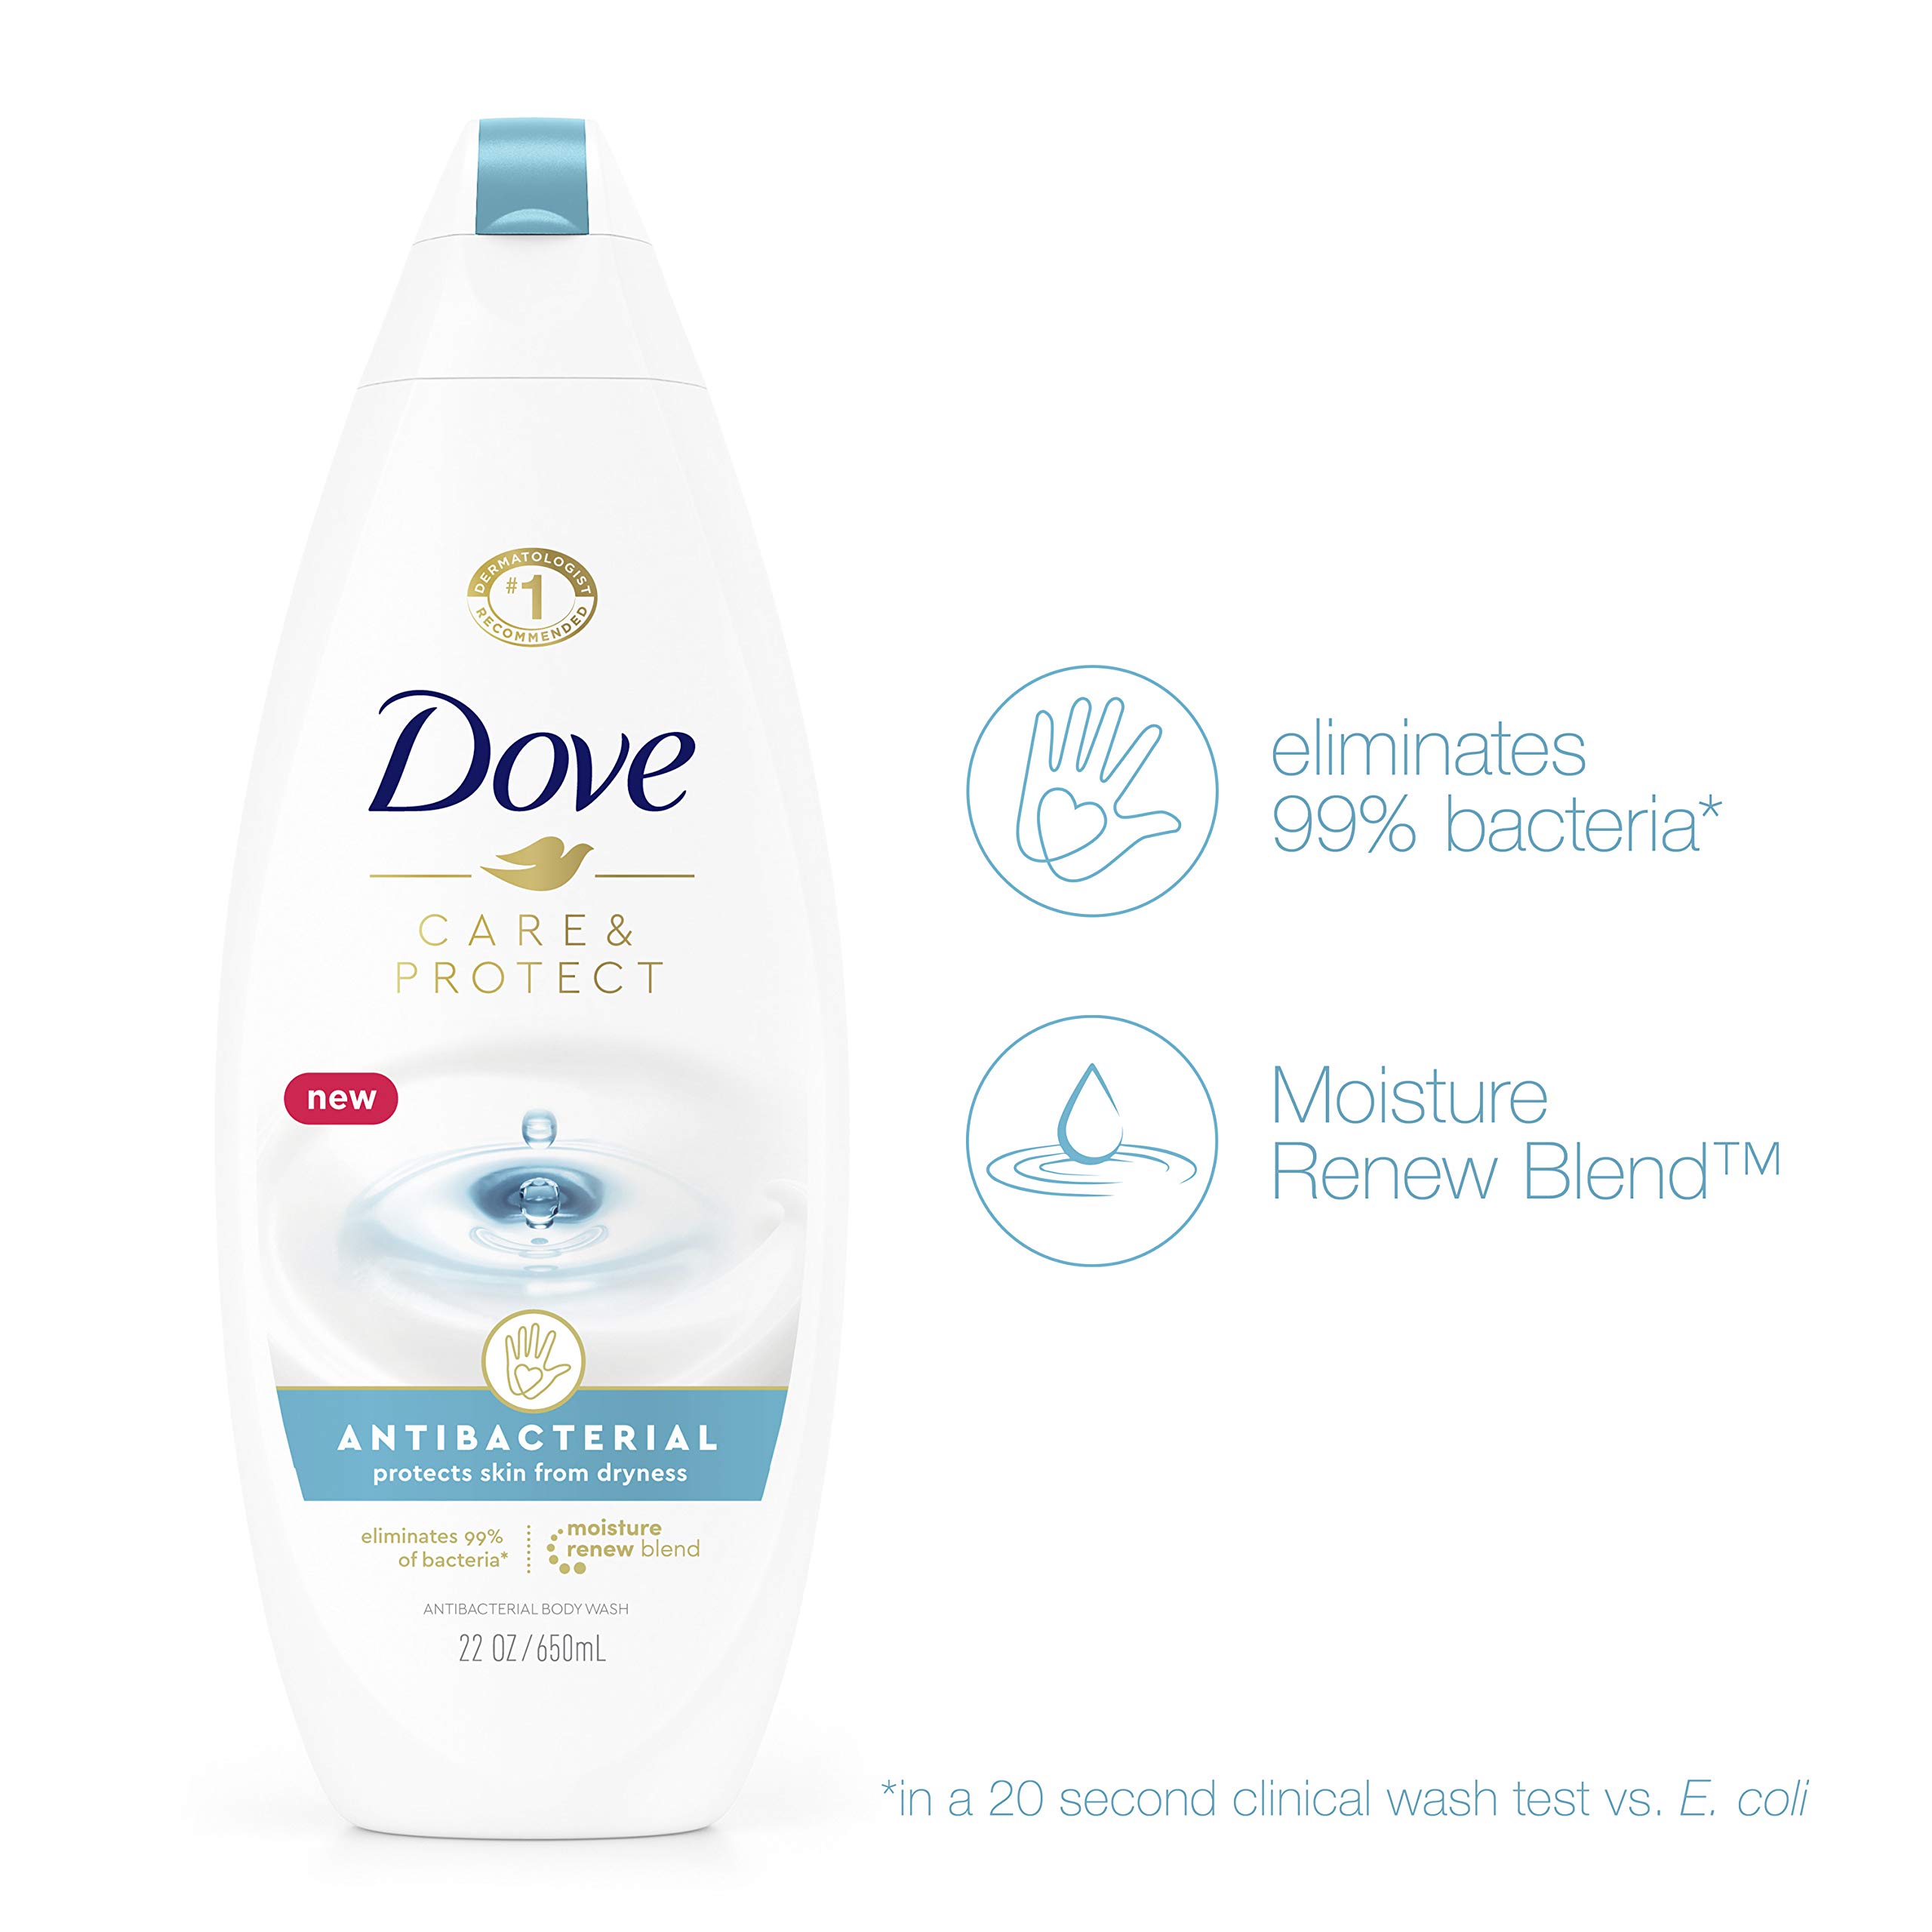 Dove Body Wash For All Skin Types Antibacterial Body Wash Protects from Dryness, 22 Fl Oz (Pack of 4)